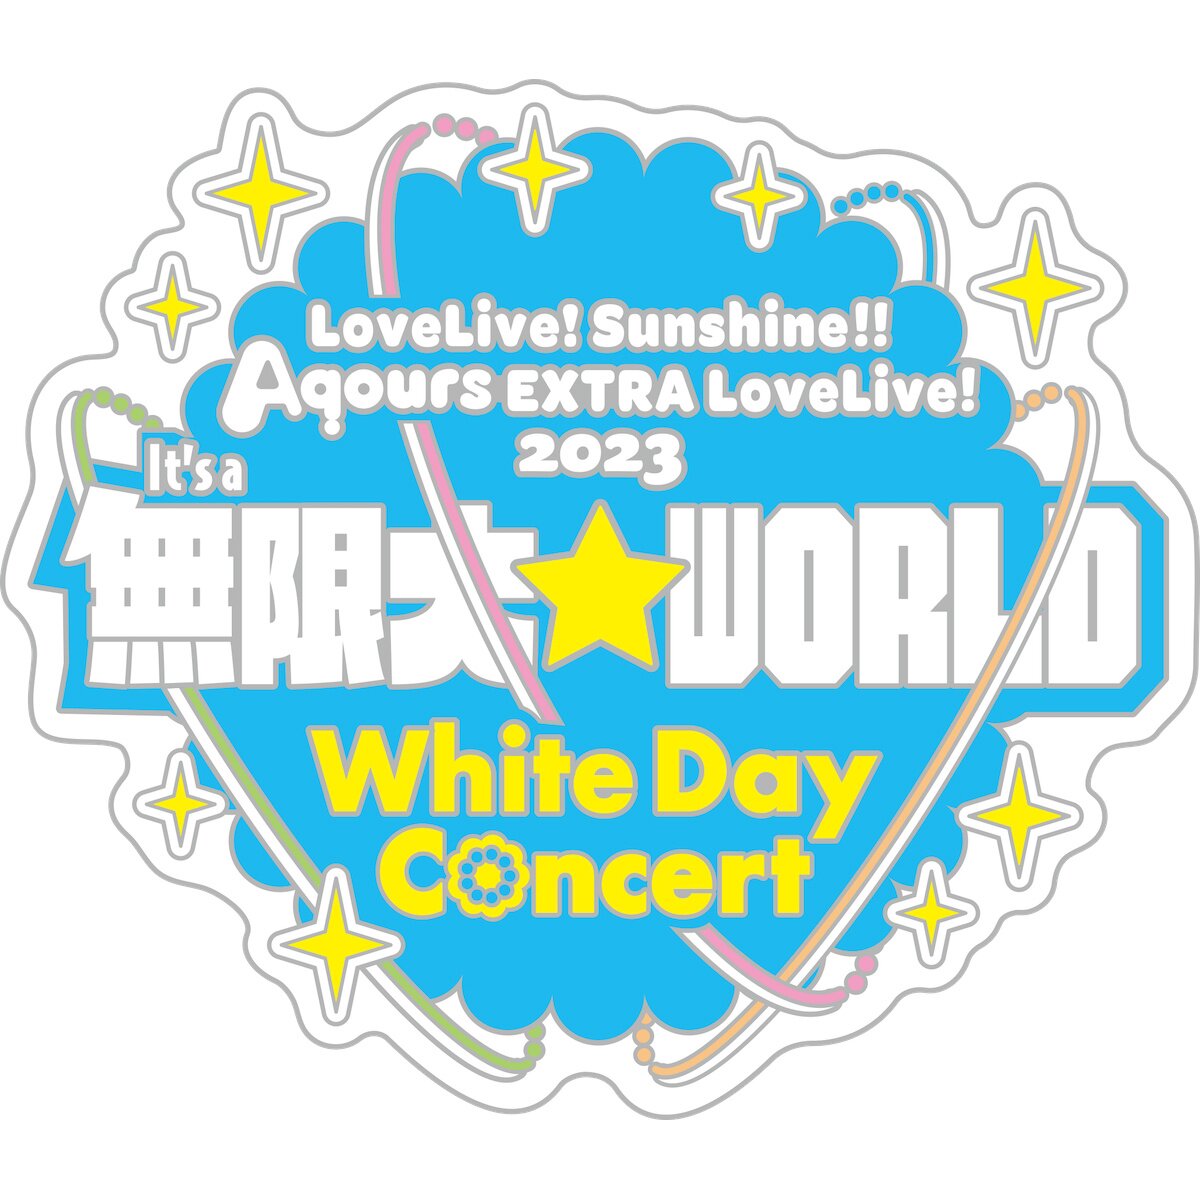 Love Live! Sunshine!! Aqours EXTRA LoveLive! 2023 ～It’s a Mugendai☆WORLD～  Memorial Pin